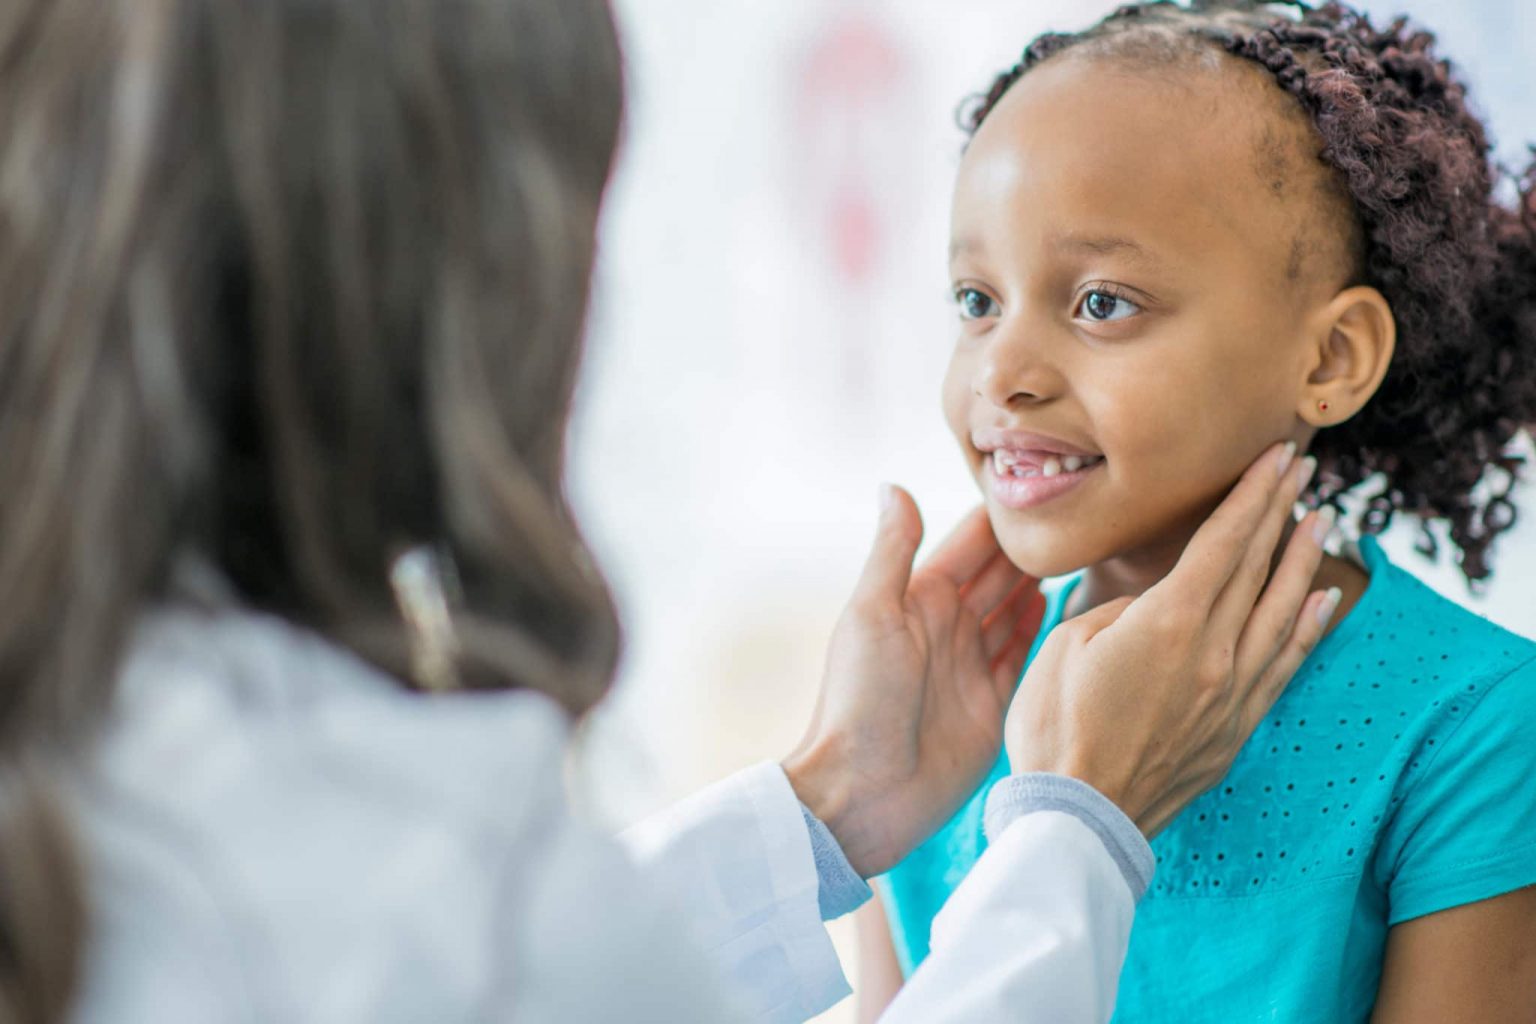 Otolaryngologist examining a young patient's neck for signs of tonsil infection.